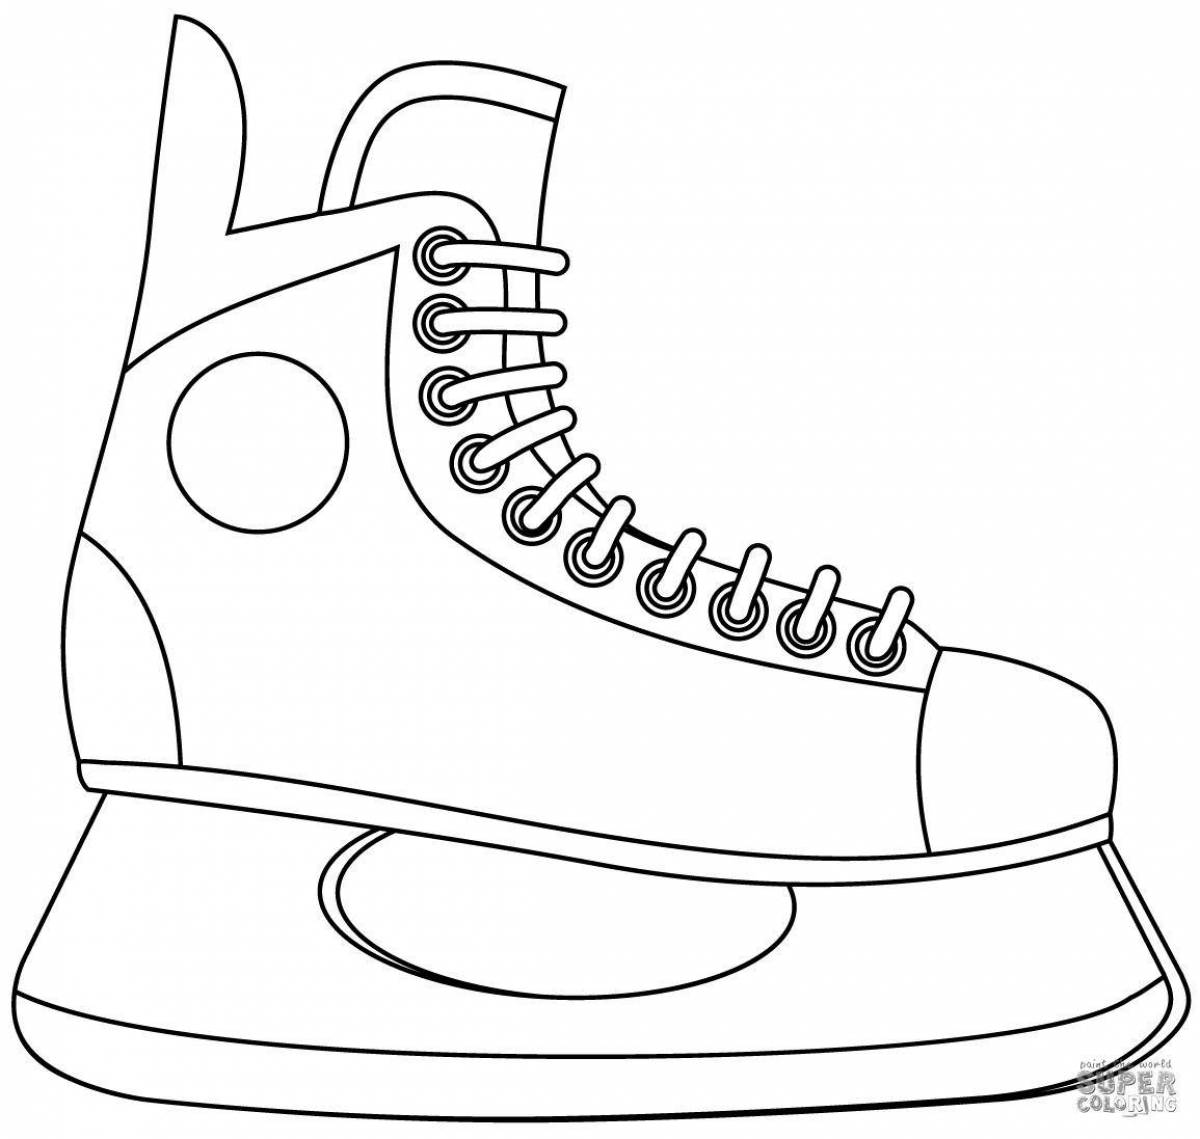 Painted skates coloring book for children 5-6 years old